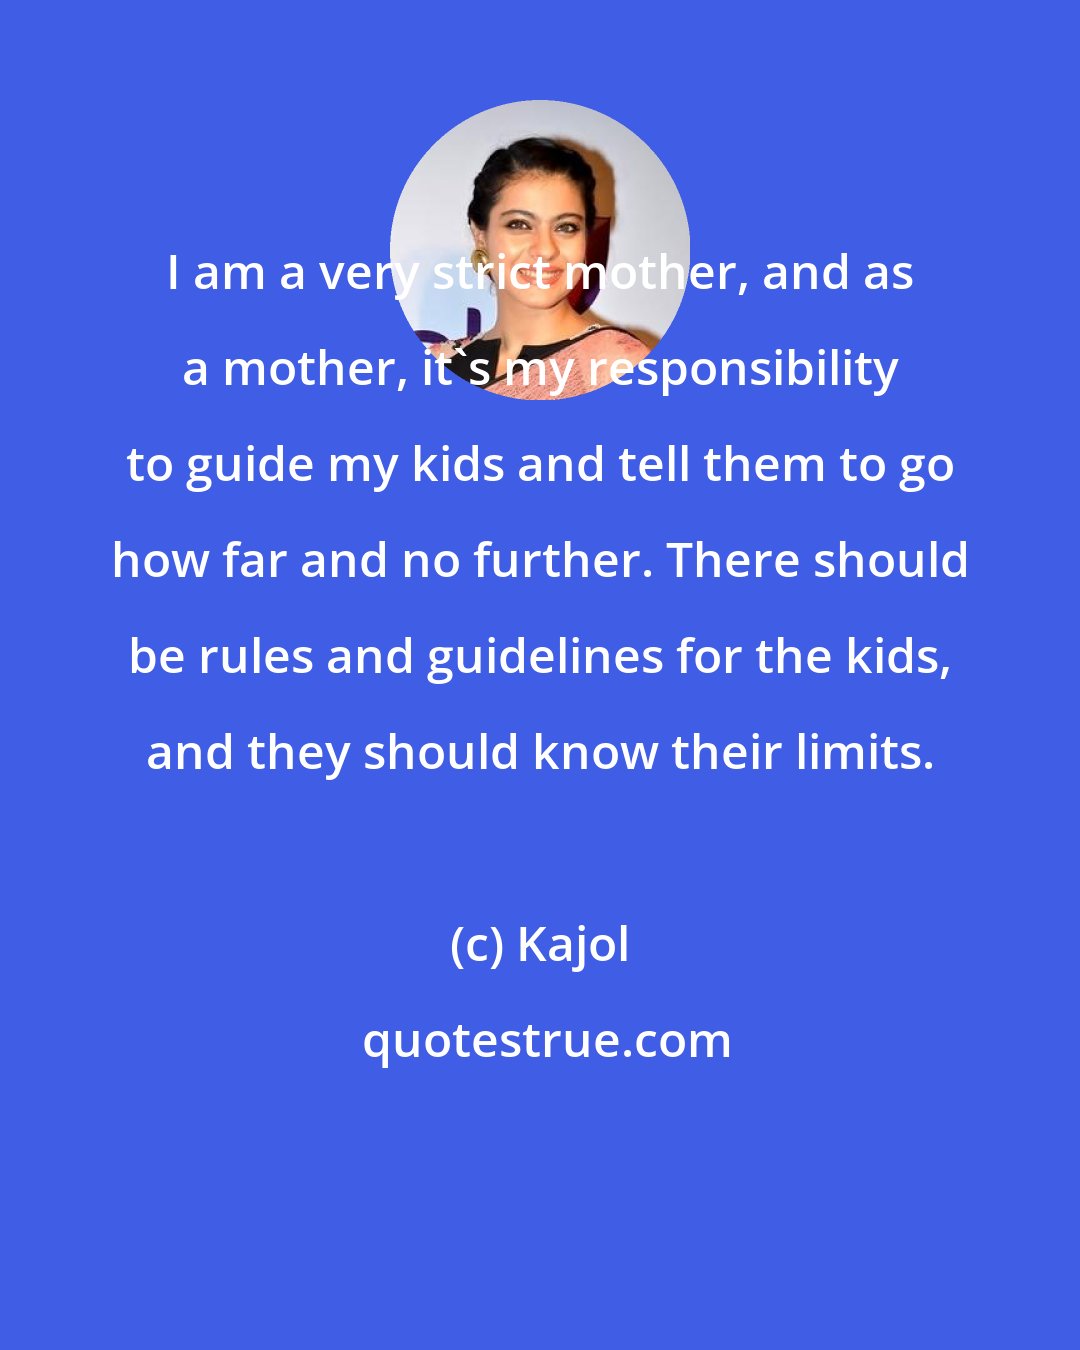 Kajol: I am a very strict mother, and as a mother, it's my responsibility to guide my kids and tell them to go how far and no further. There should be rules and guidelines for the kids, and they should know their limits.